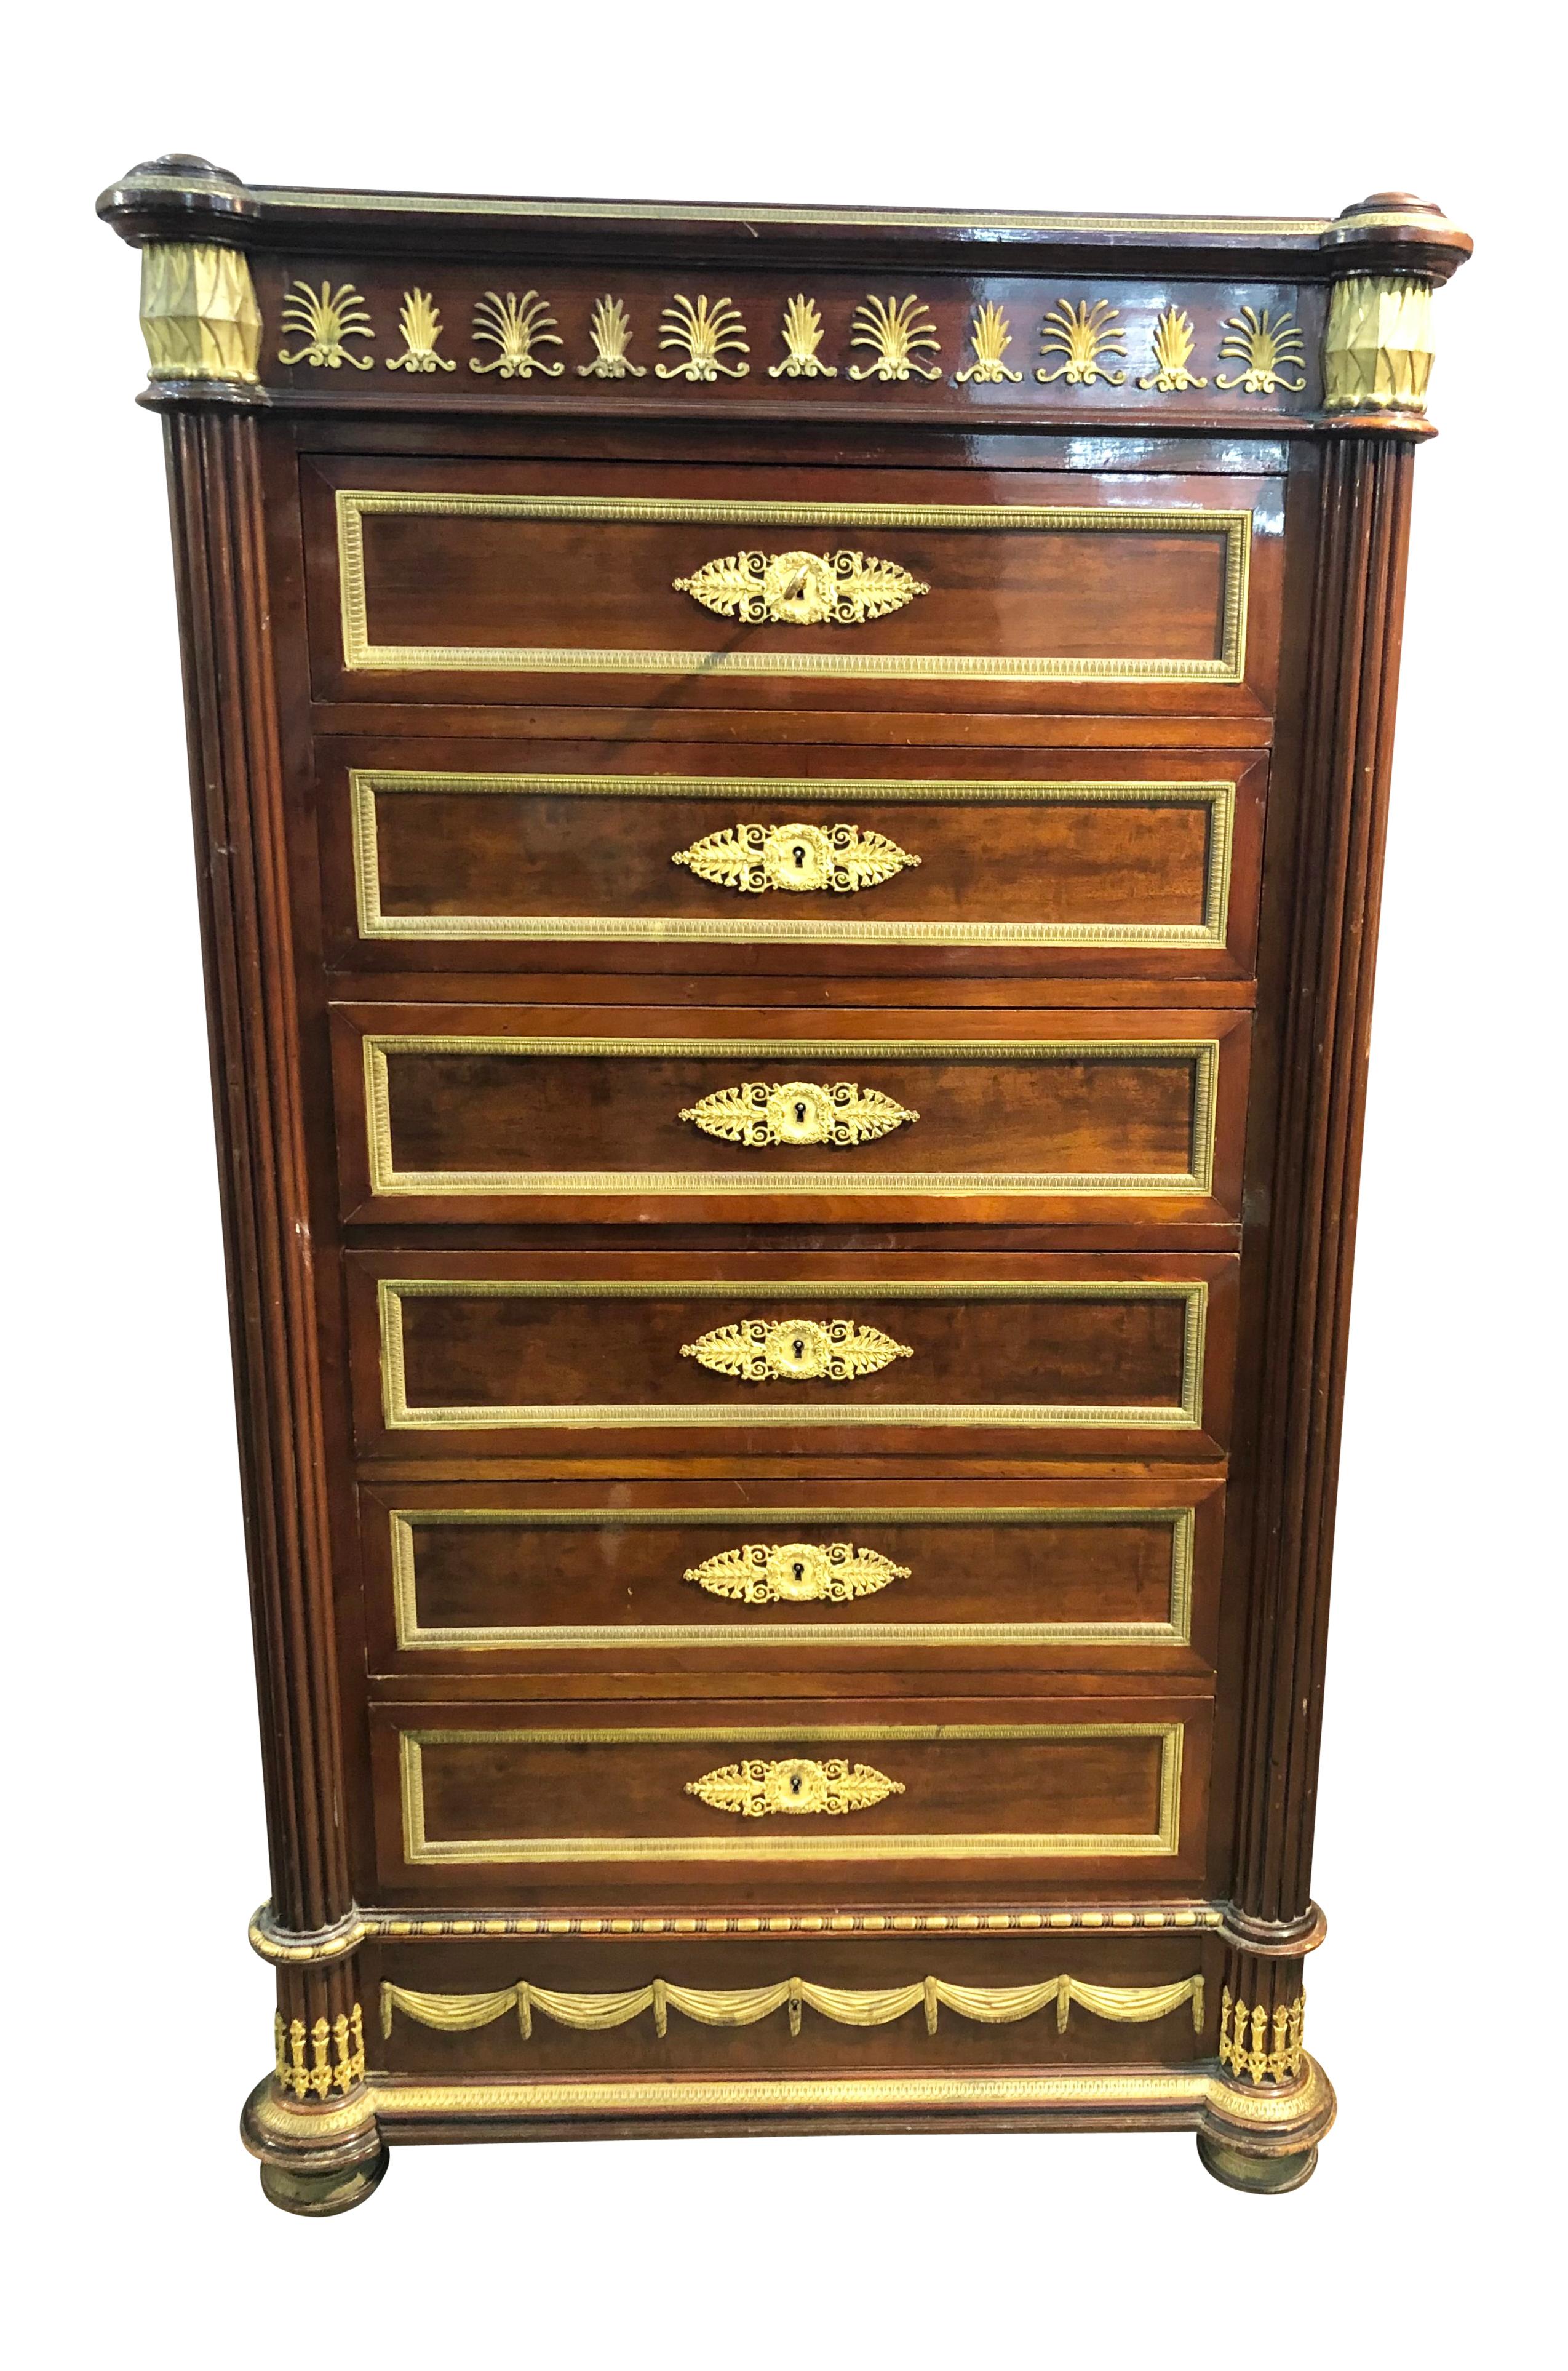 French Empire Style Ormolu Semainier tall chest of drawers. A classic French Empire style Semainier tall bedroom dresser, lingerie chest or gentleman's dresser in mahogany and bronze ormolu with seven drawers. This magnificent piece is framed with